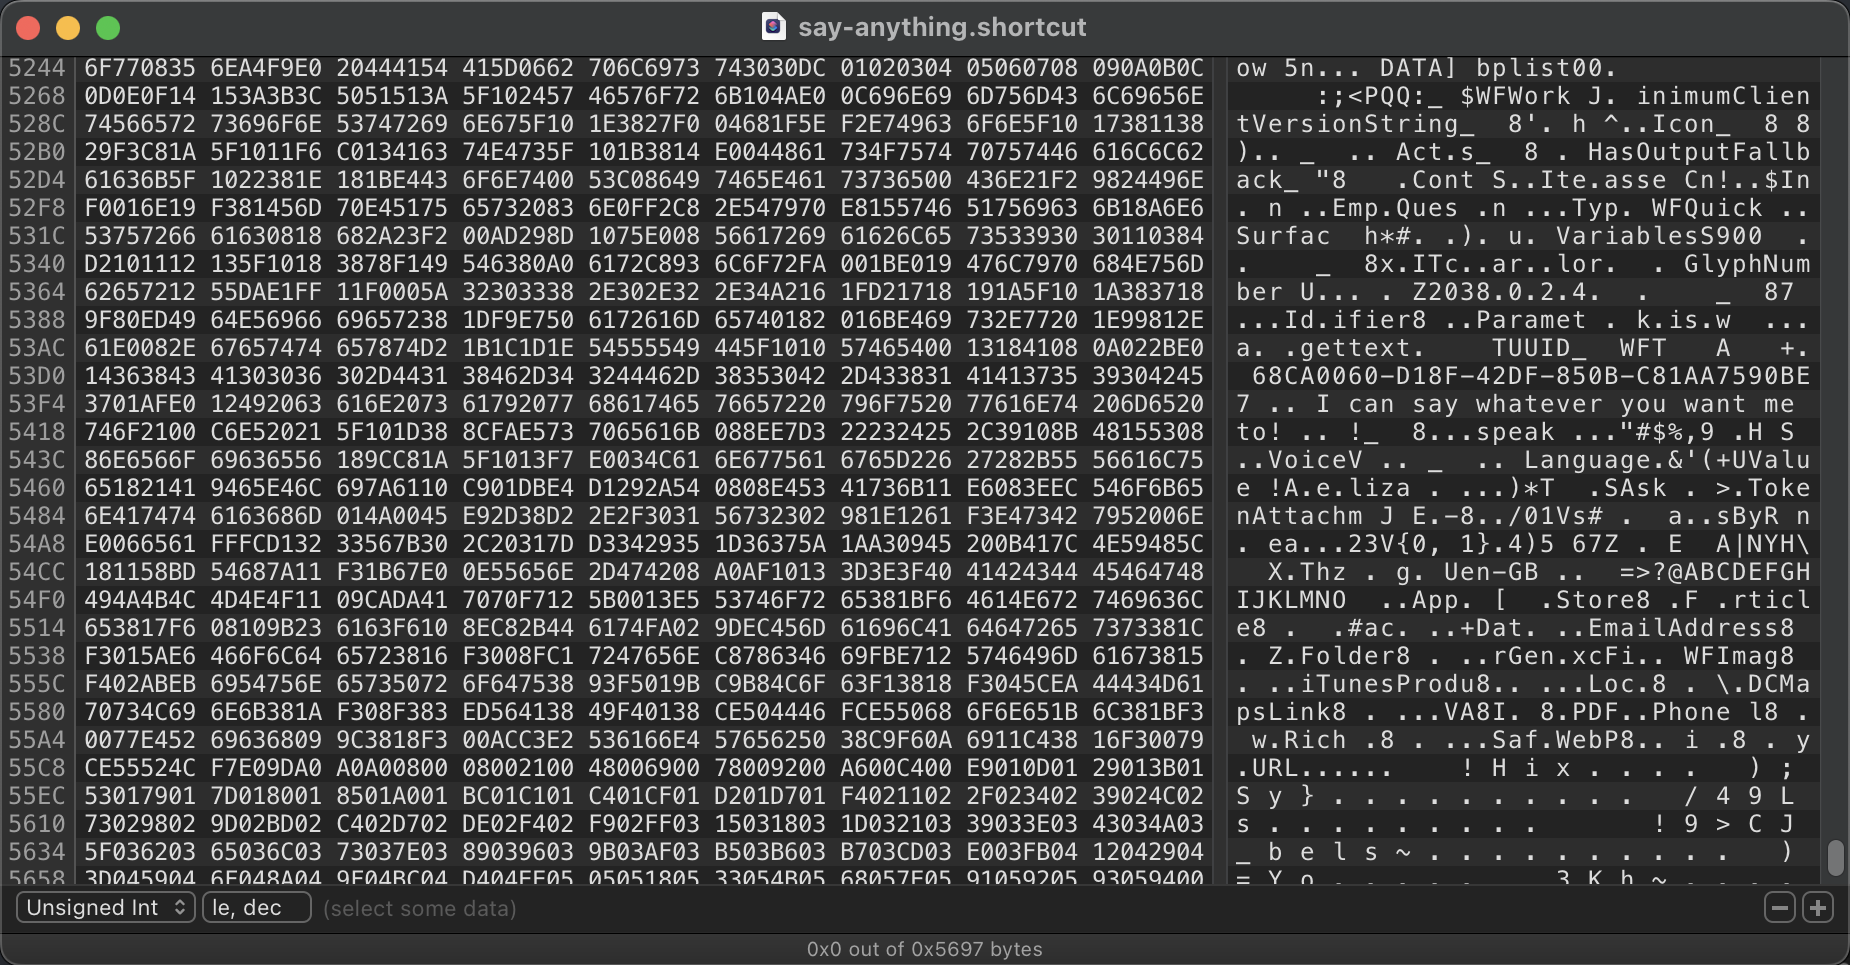 A screenshot of our shortcut in the Hex Fiend hex editor, now at the end of the file. The string we initially input in our Shortcut can be seen.